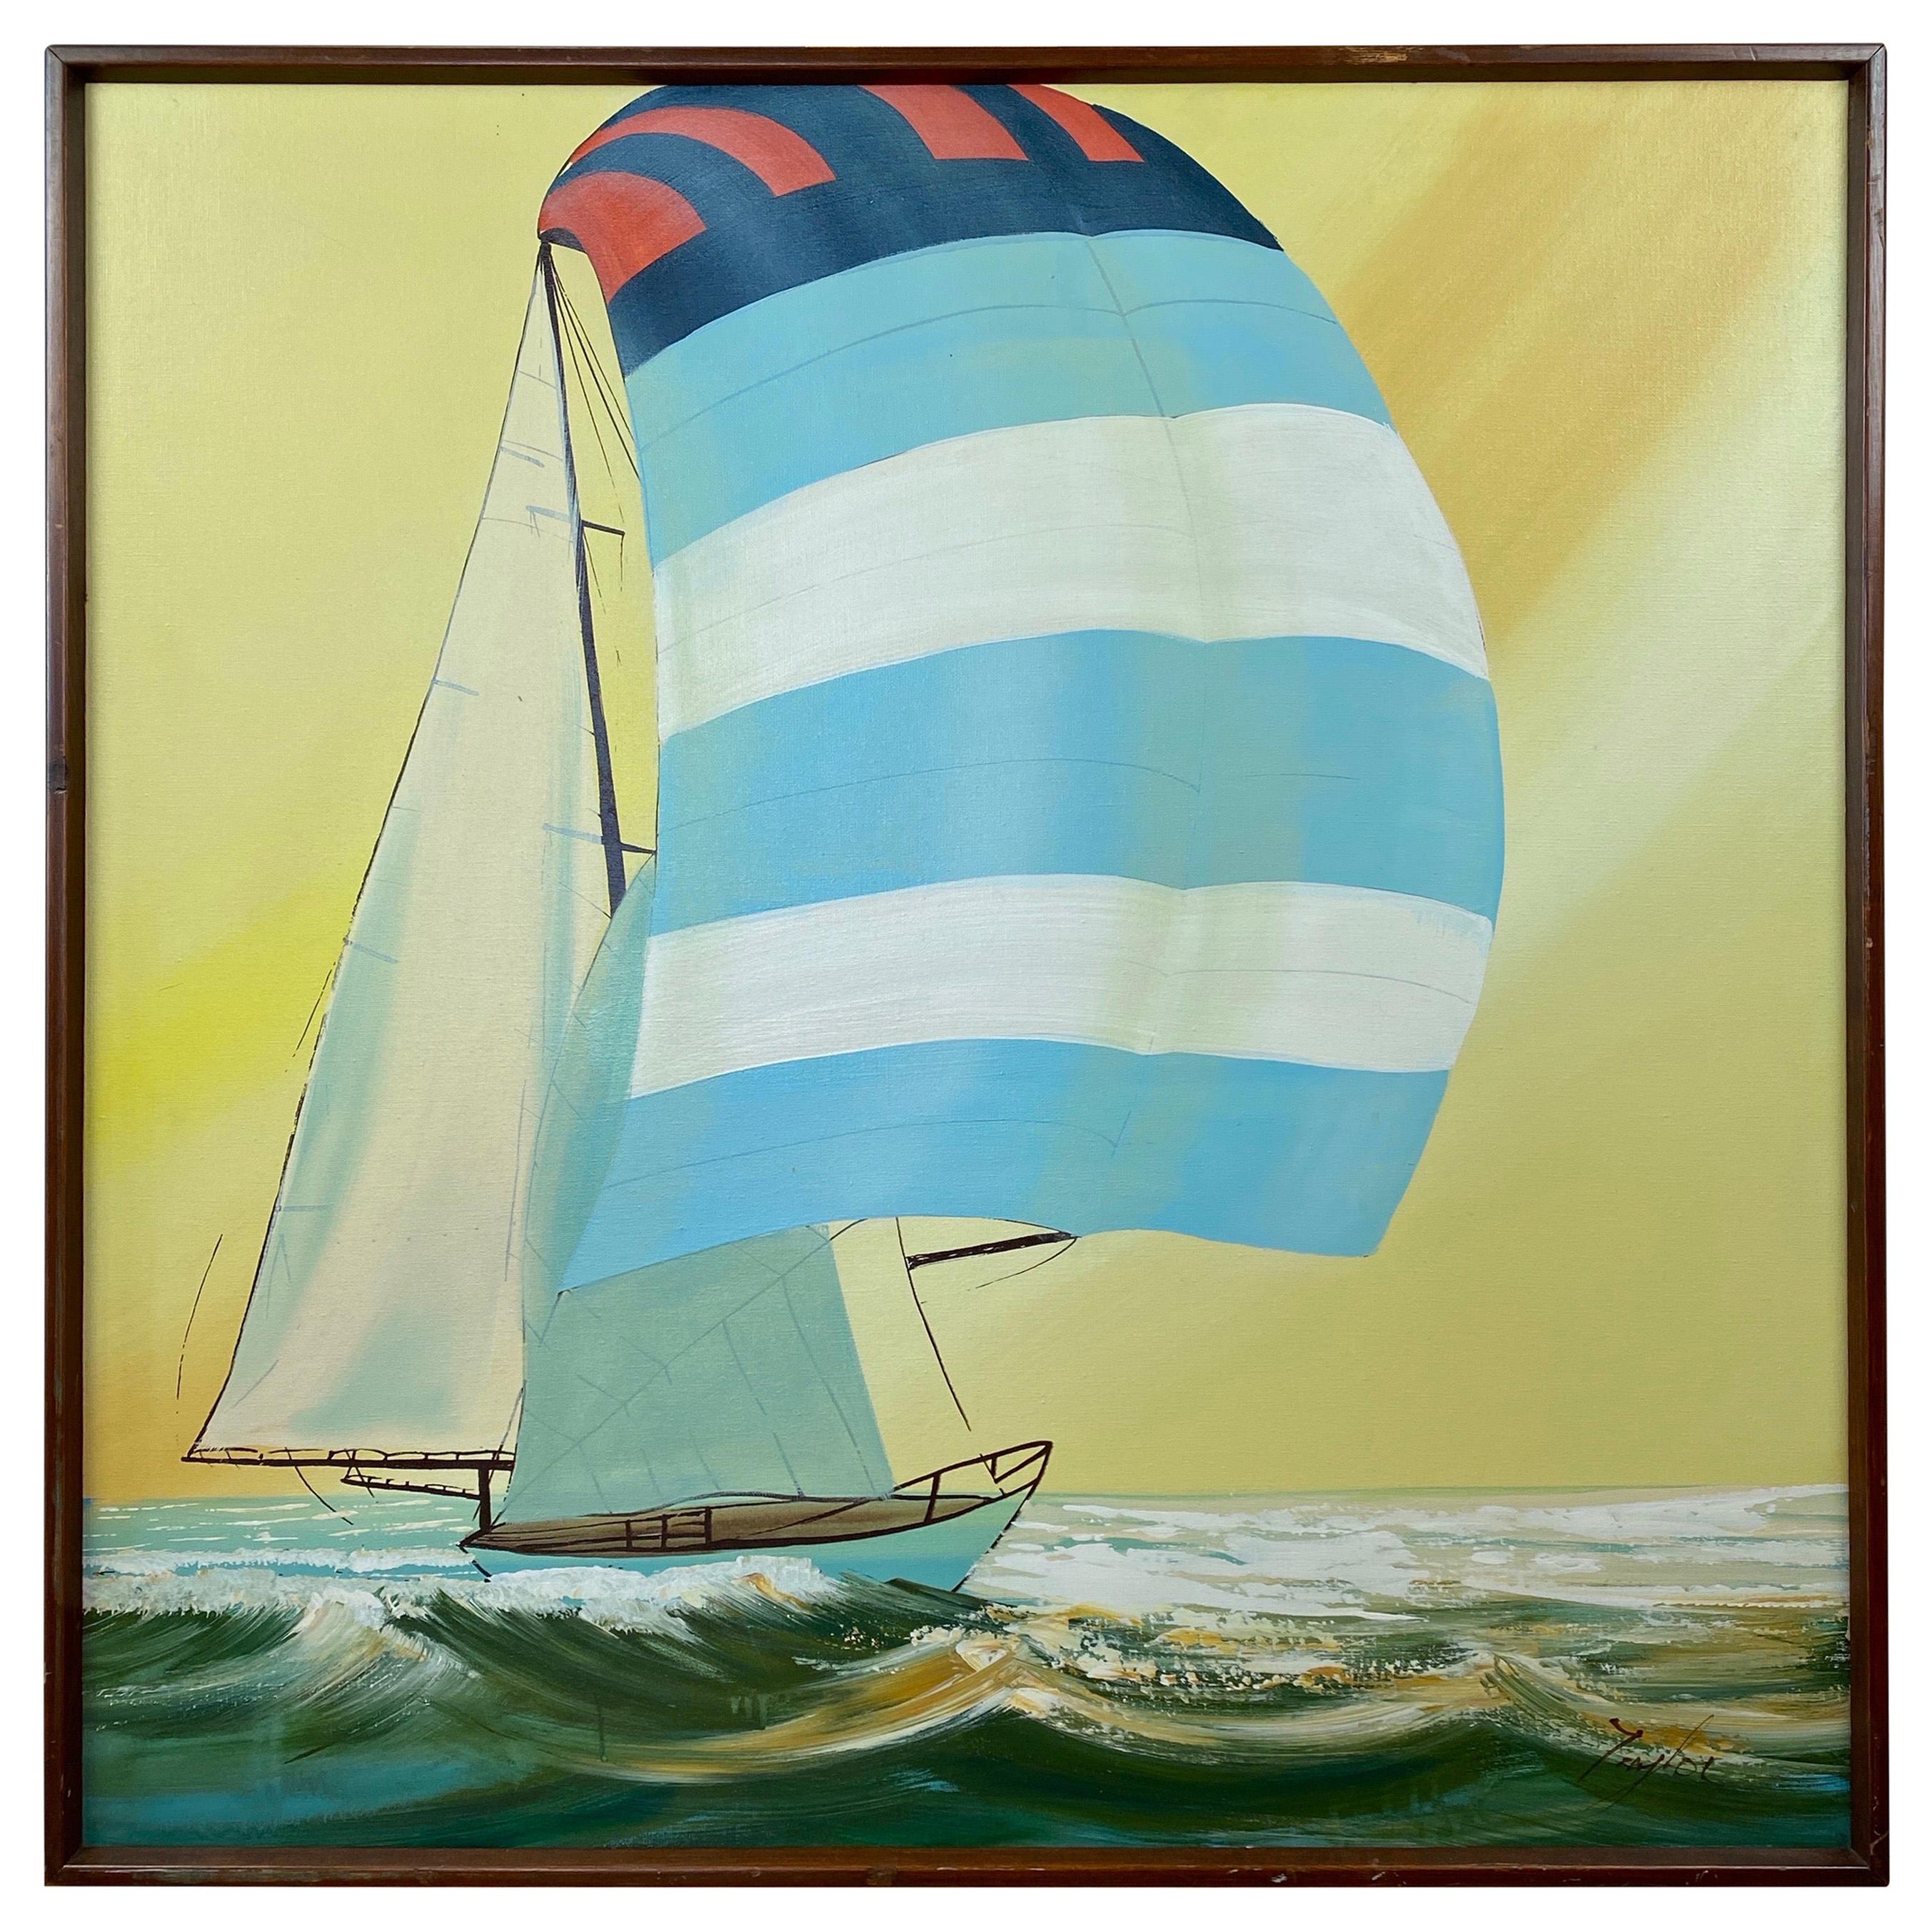 A very large 1970s acrylic on canvas framed painting of a sailboat breaking the waves, signed “Taylor”.

Bright, sunny scene dominated by a towering, fully billowed spinnaker with eye-catching baby blue, white, navy, and red stripes. Low, choppy